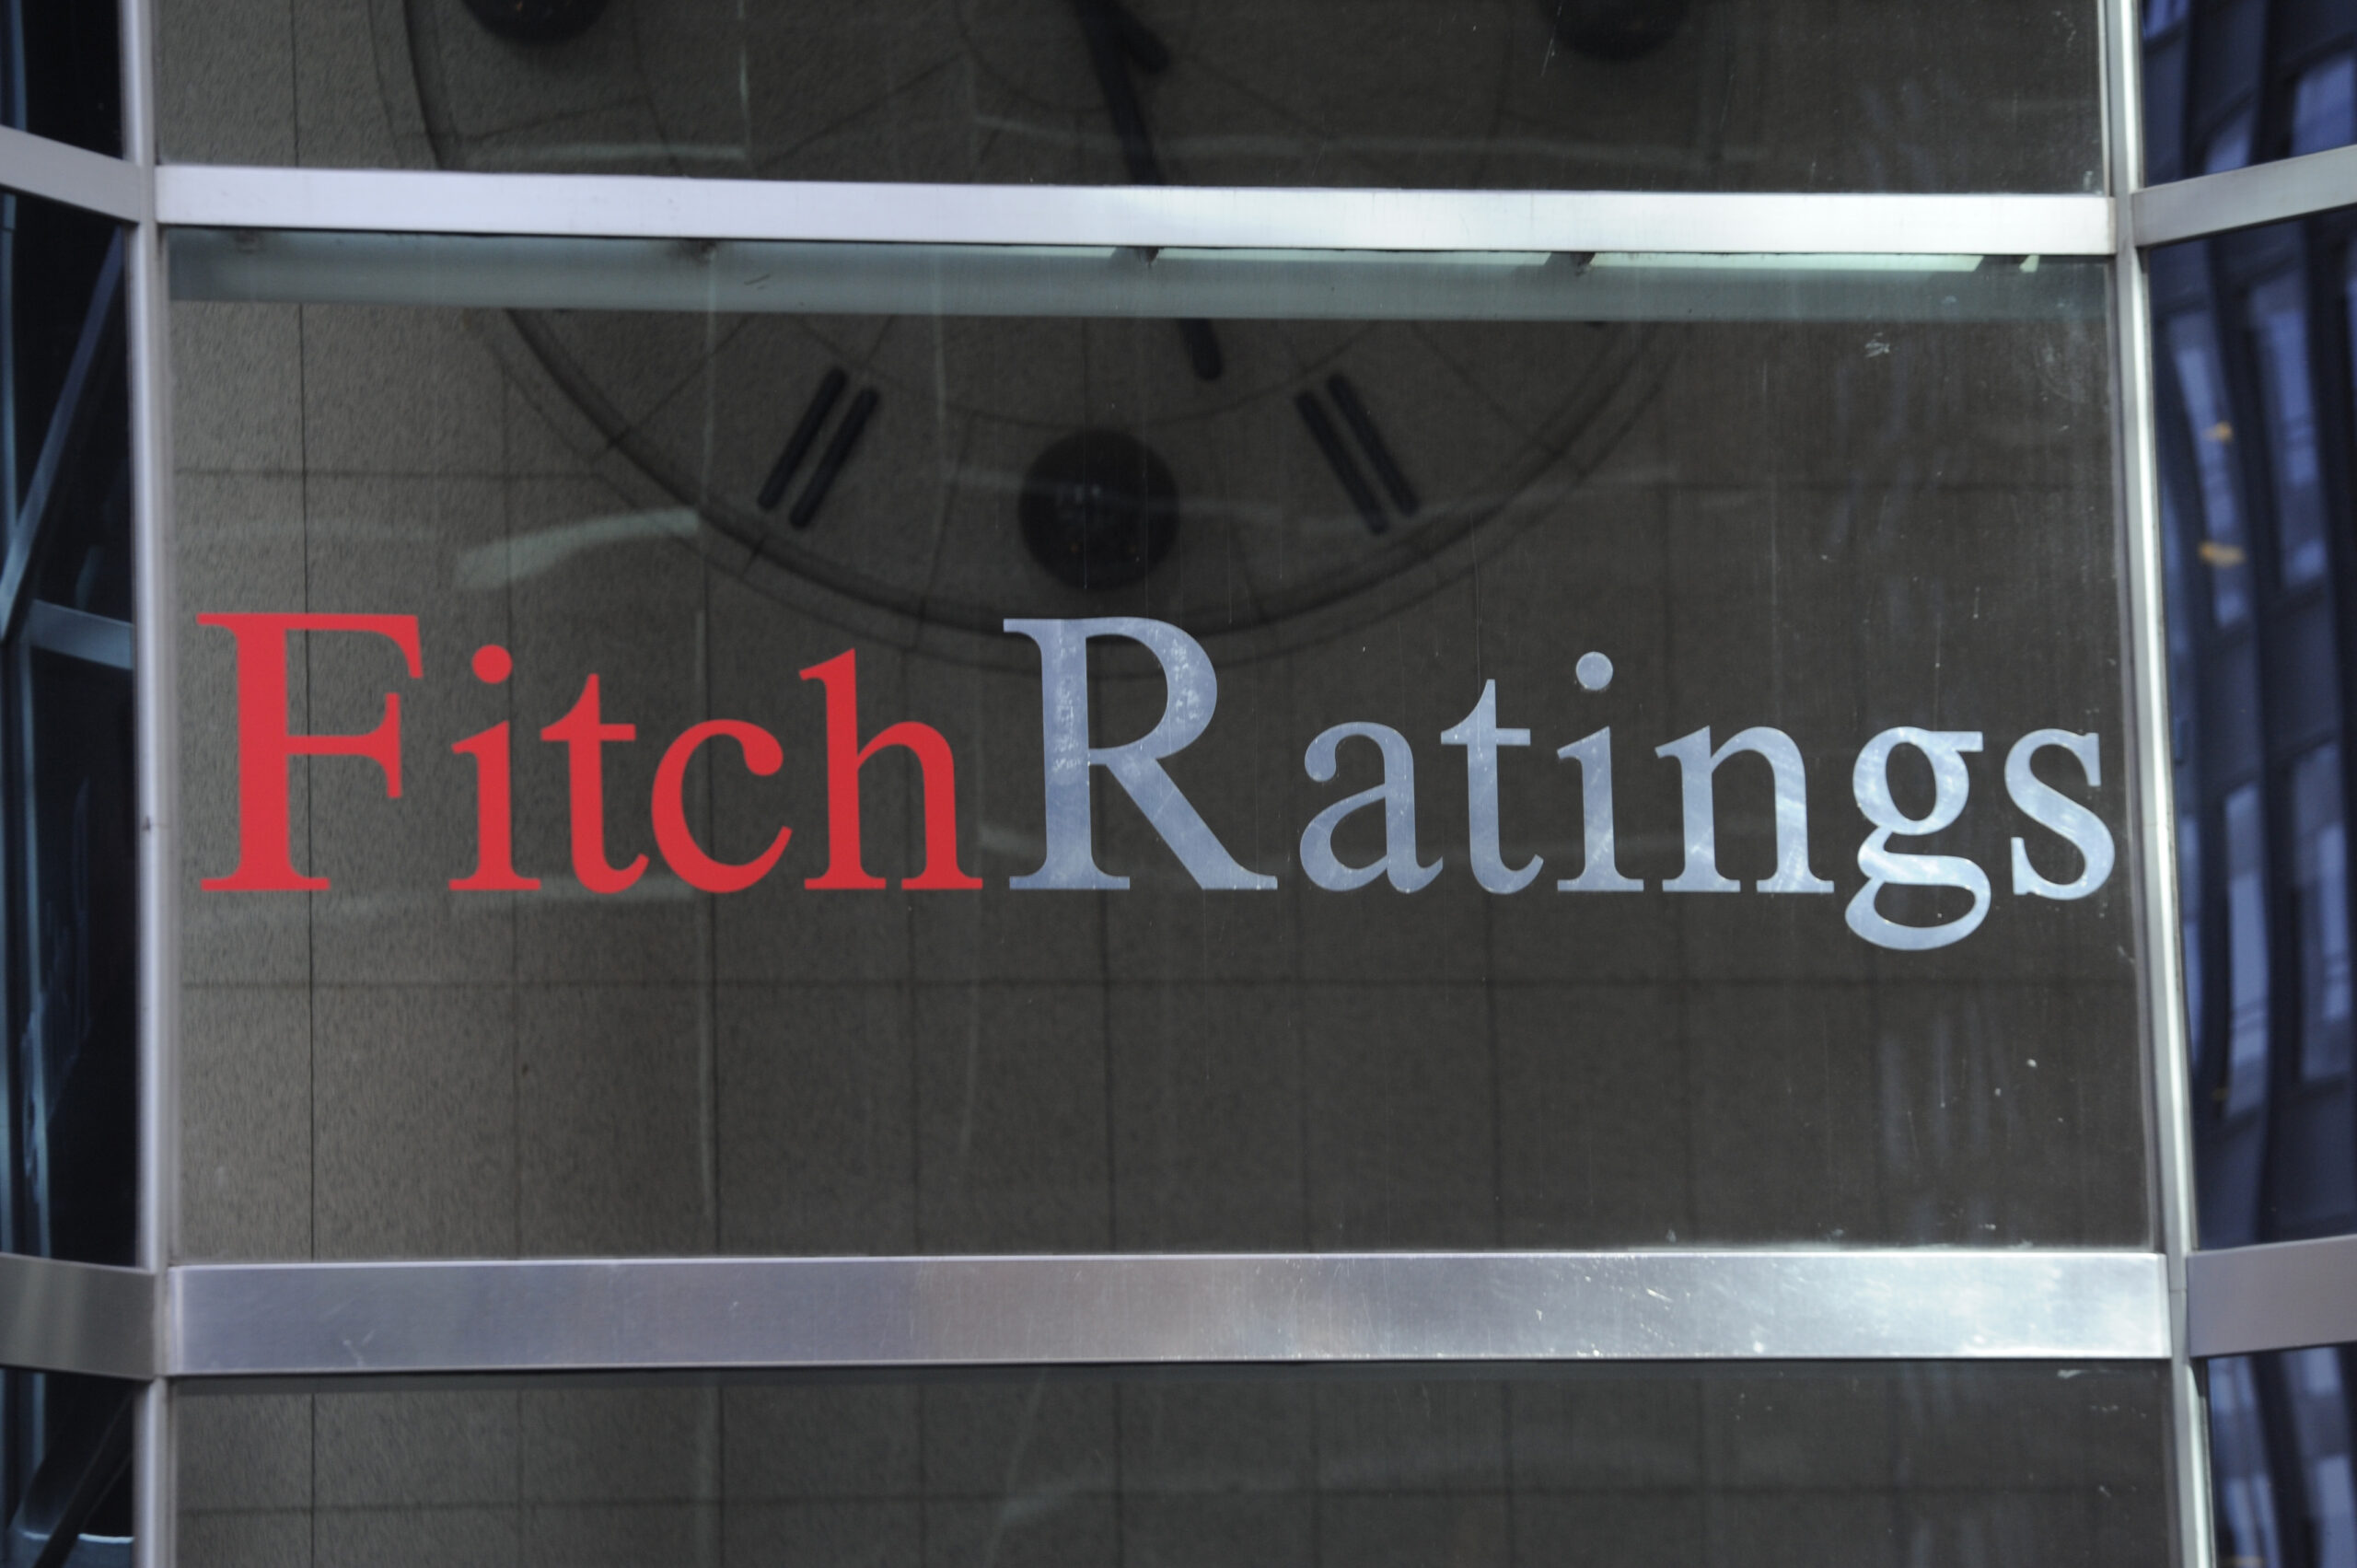 FILE - This photo shows signage for Fitch Ratings, Sunday, Oct. 9, 2011, in New York. On Tuesday, A...